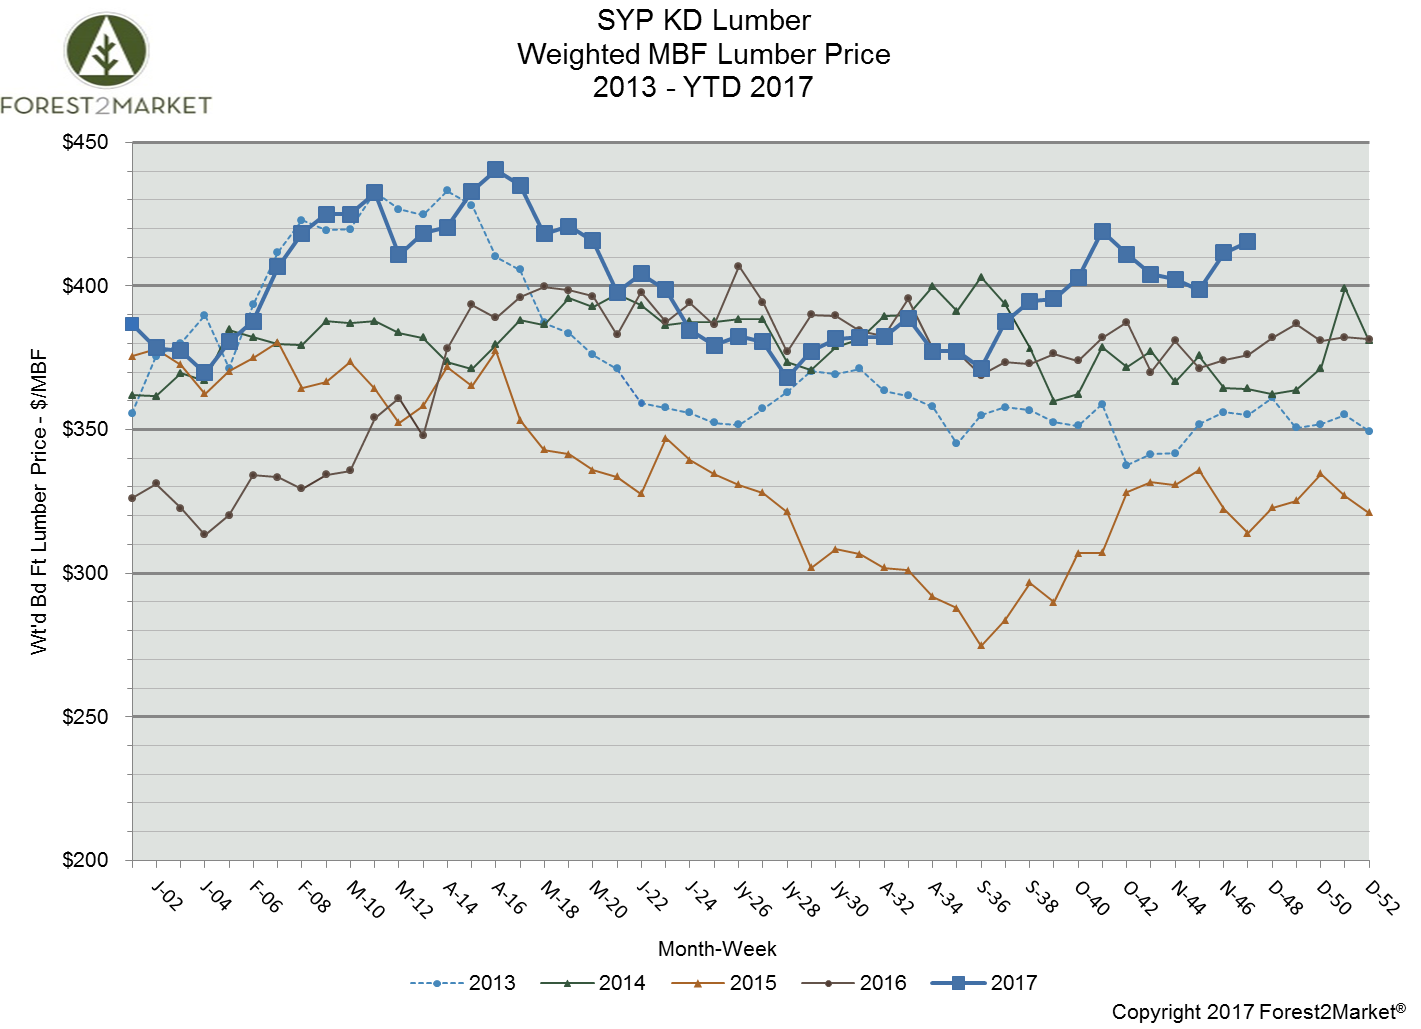 Southern Yellow Pine Lumber Prices Remain High in November